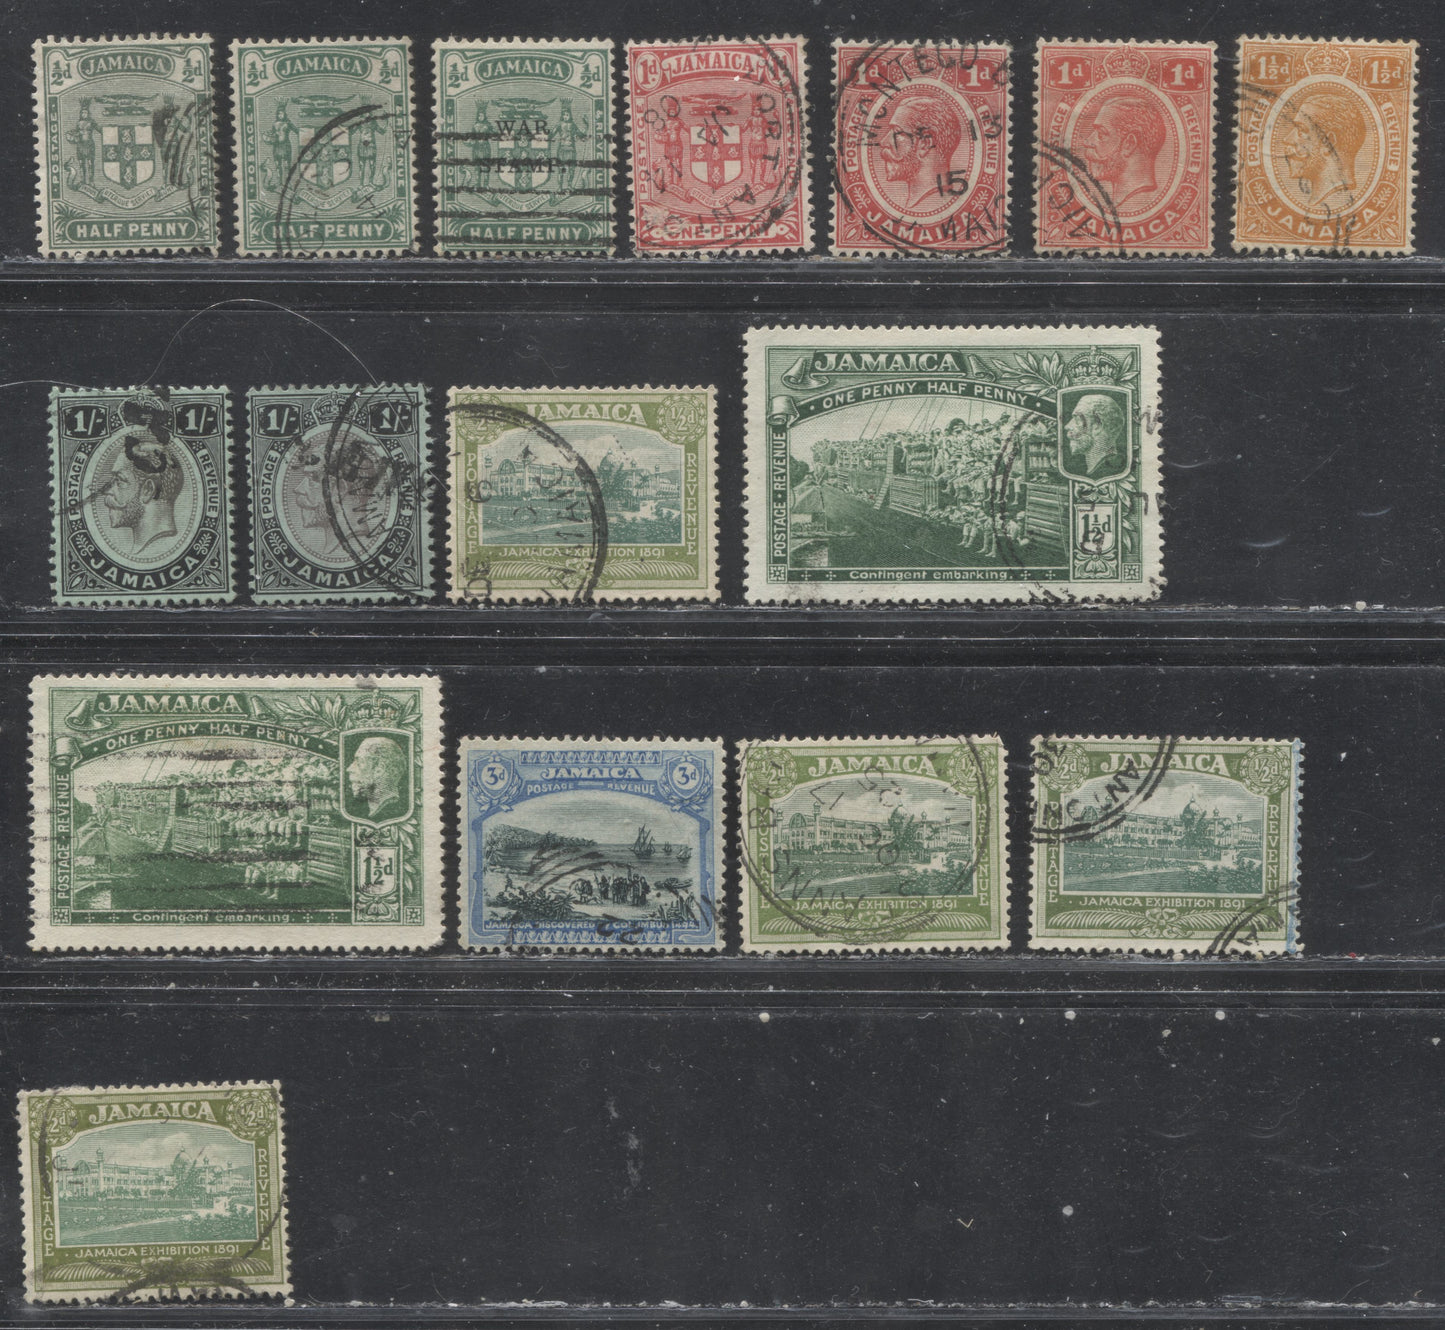 Lot 134 Jamaica SG#37/94a 1/2d - 1/- Green - Black on Green Various Designs, 1905-1921 Keyplate and Engraved Definitive Issues, 16 Fine and VF Used Singles, Multiple Crown & Script CA Watermark, Including Listed & Unlisted Shades